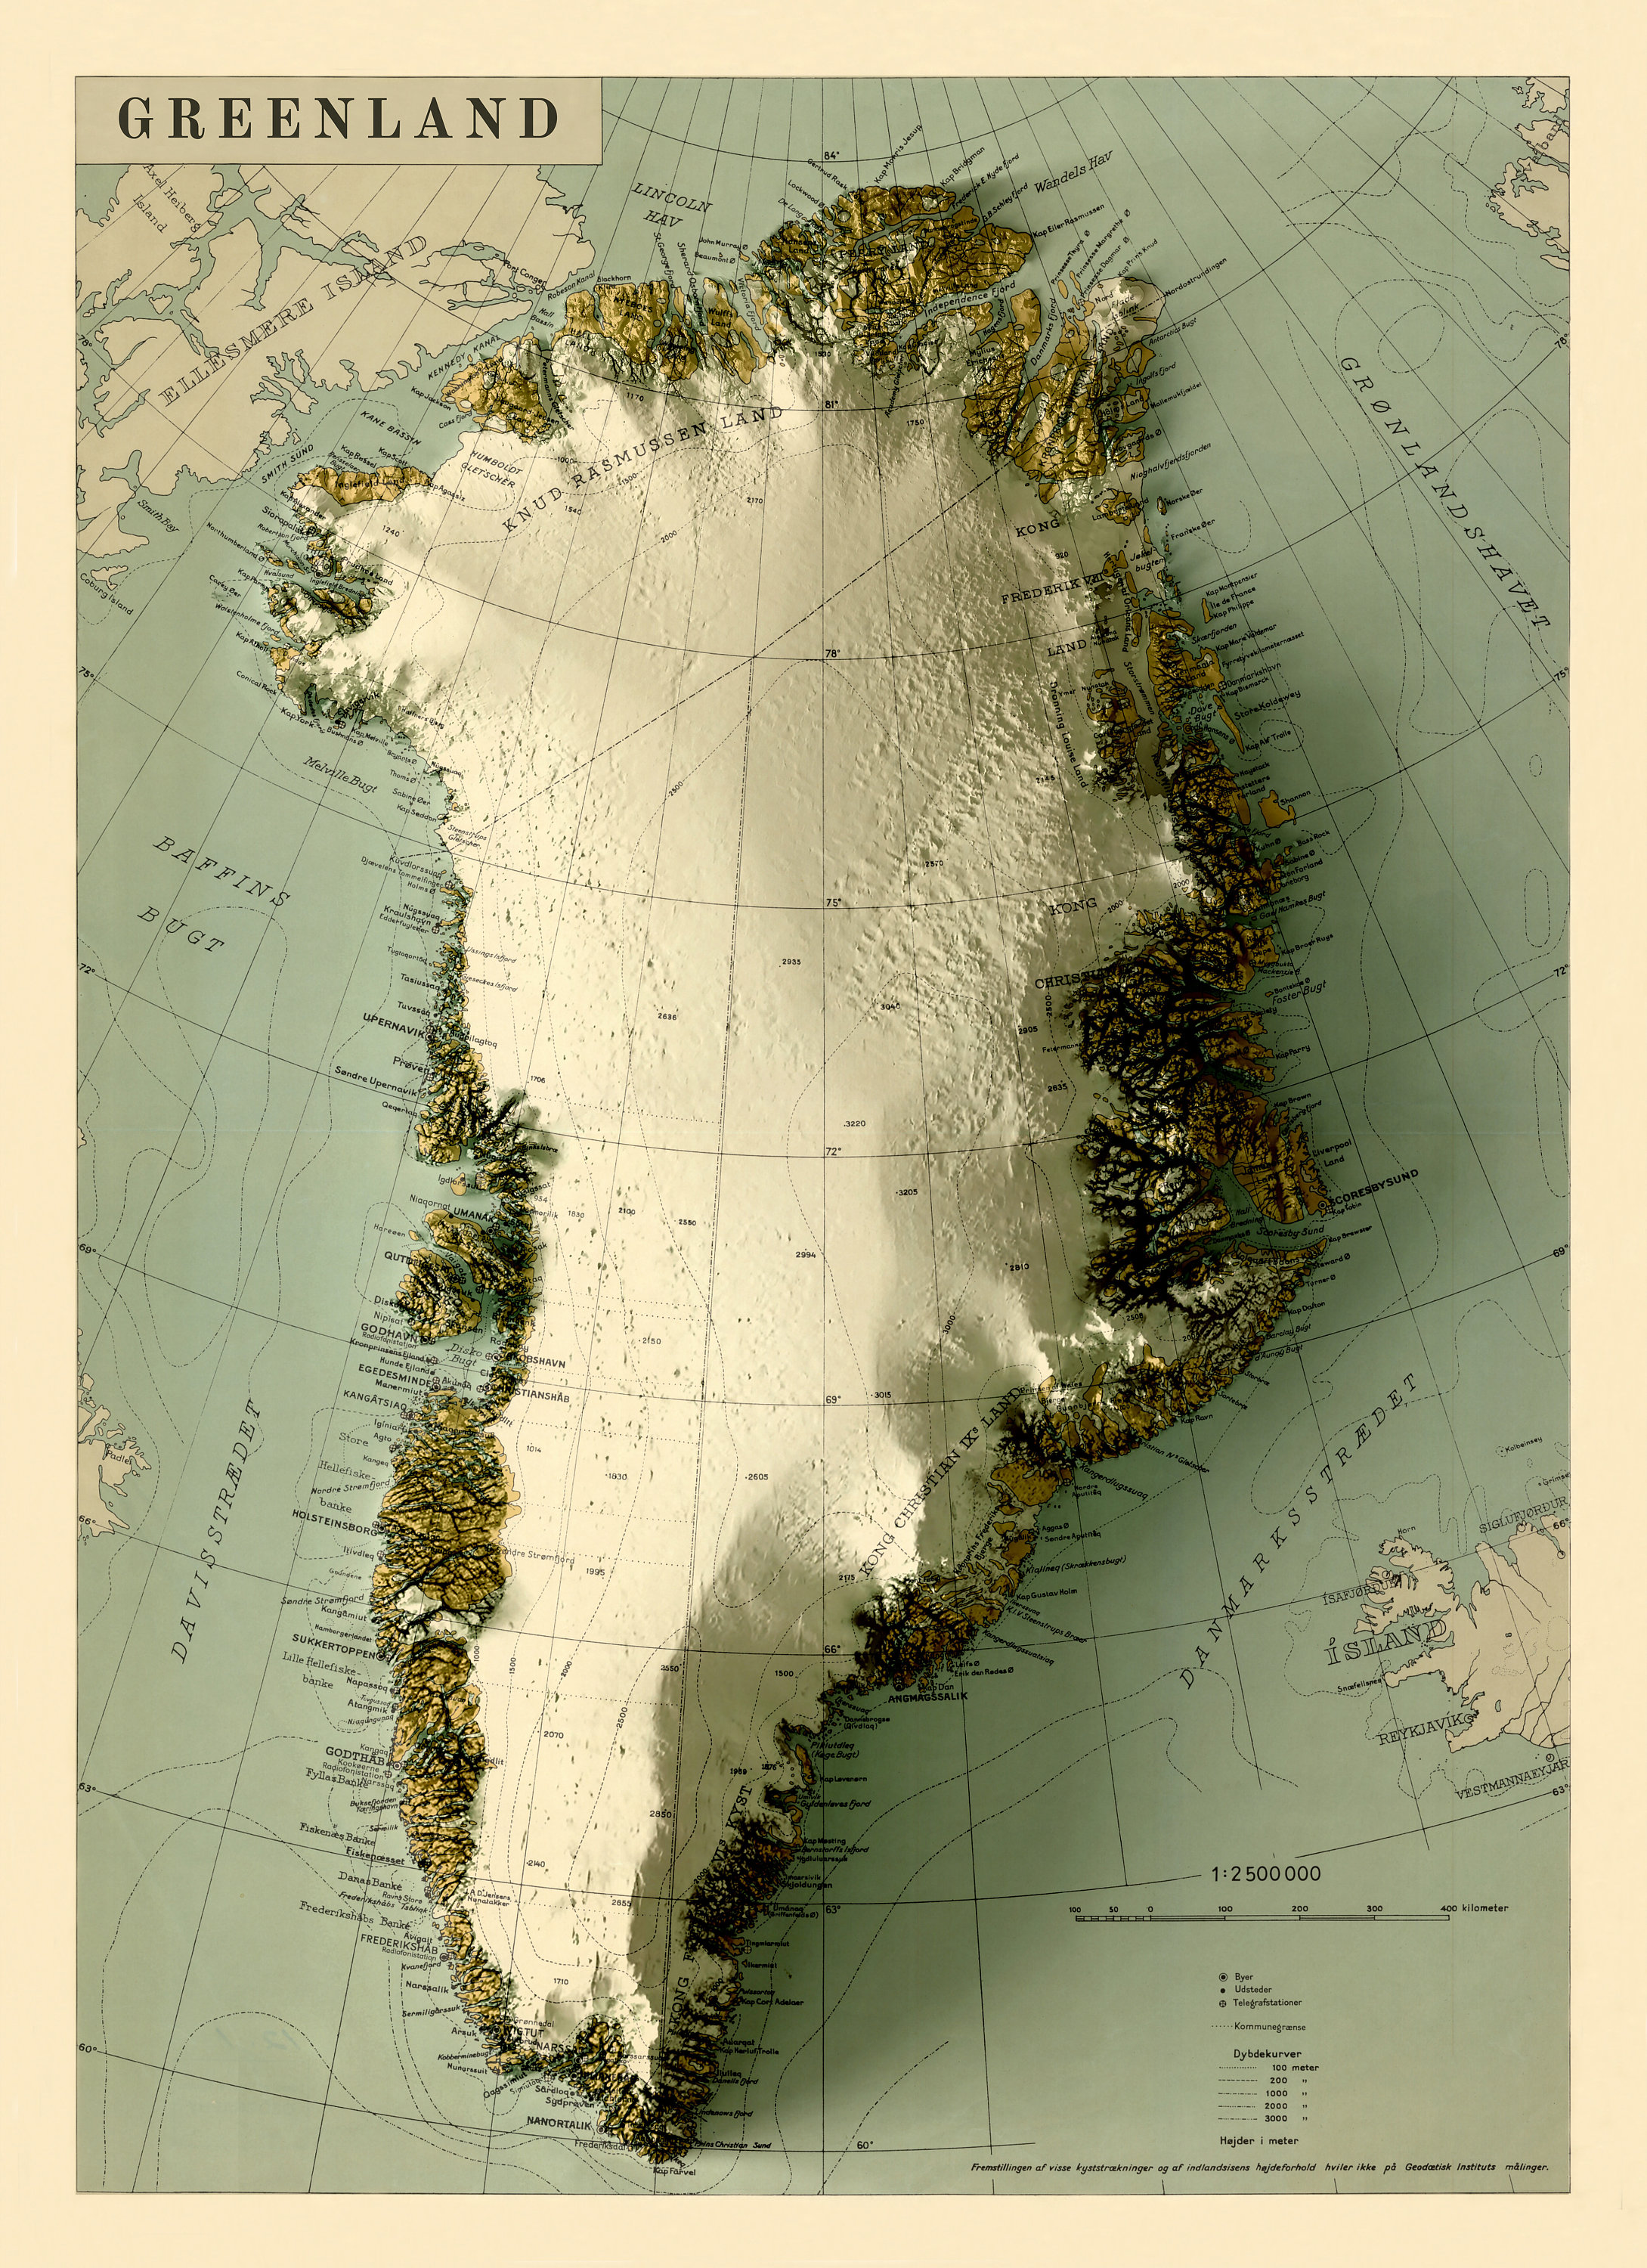 greenland-map-greenland-relief-map-denmark-map-greenland-etsy-uk